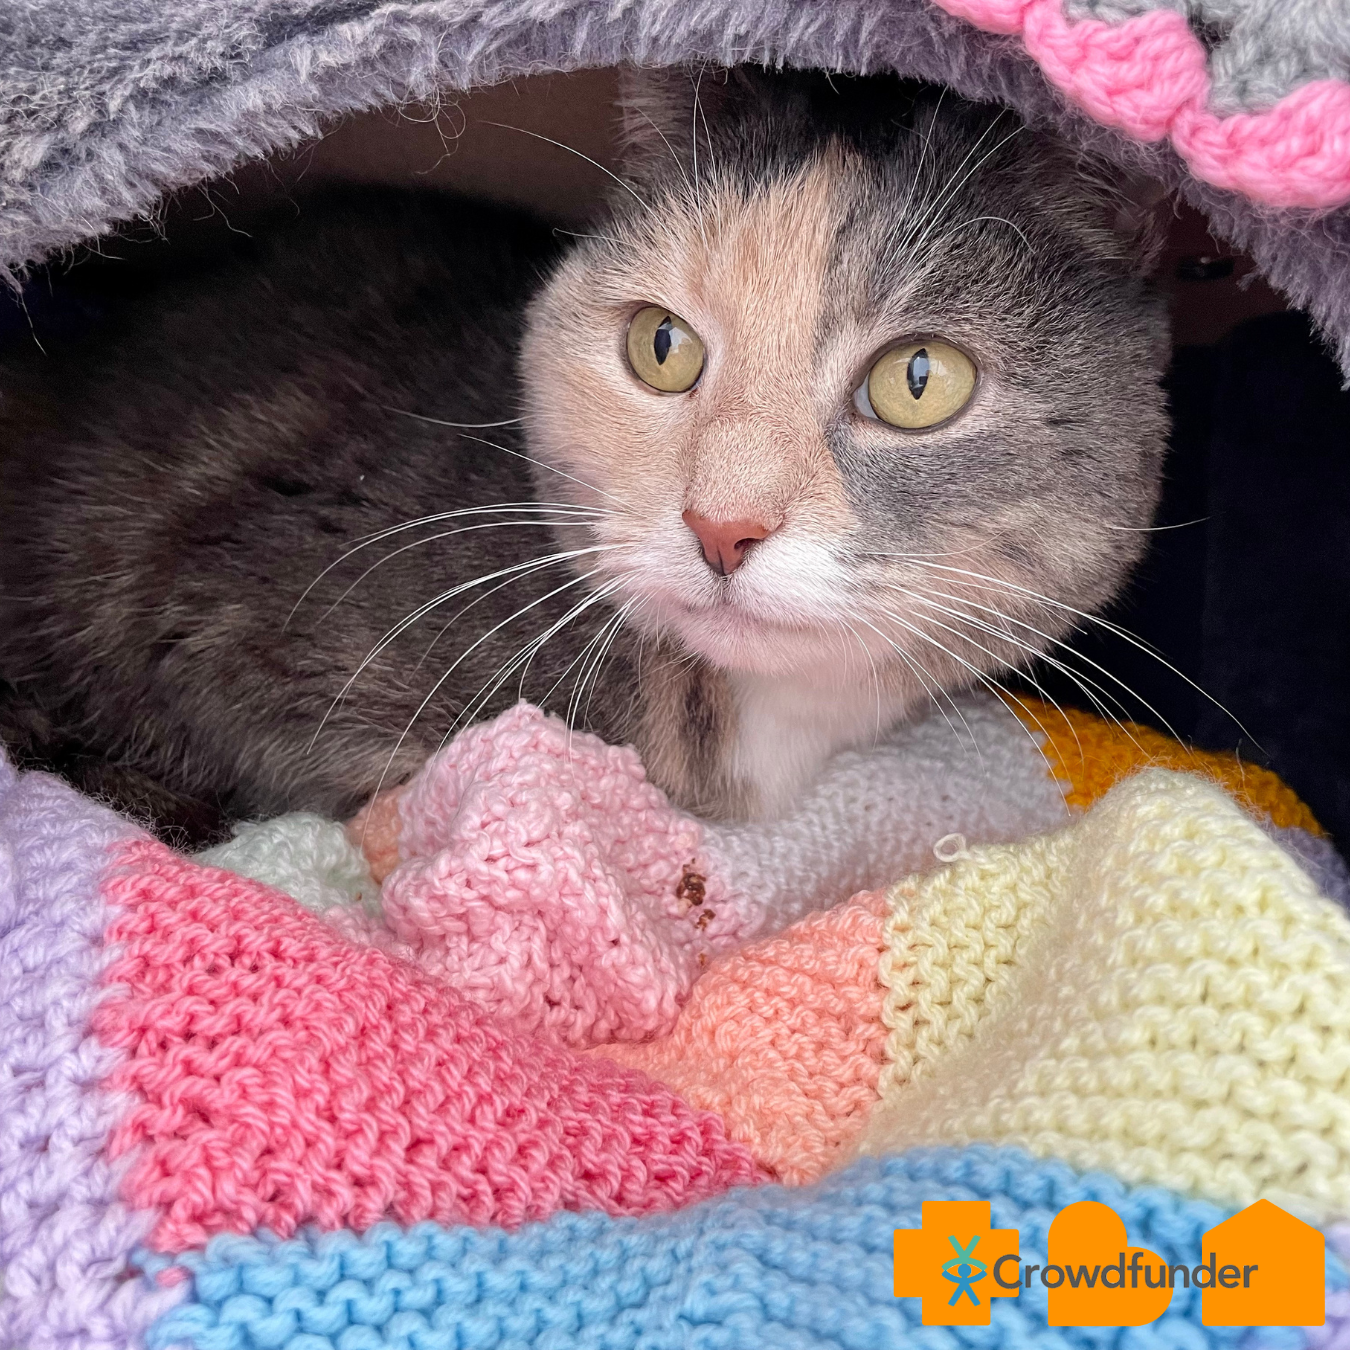 cat looking cosy and warm_RSPCA Crowdfunder 